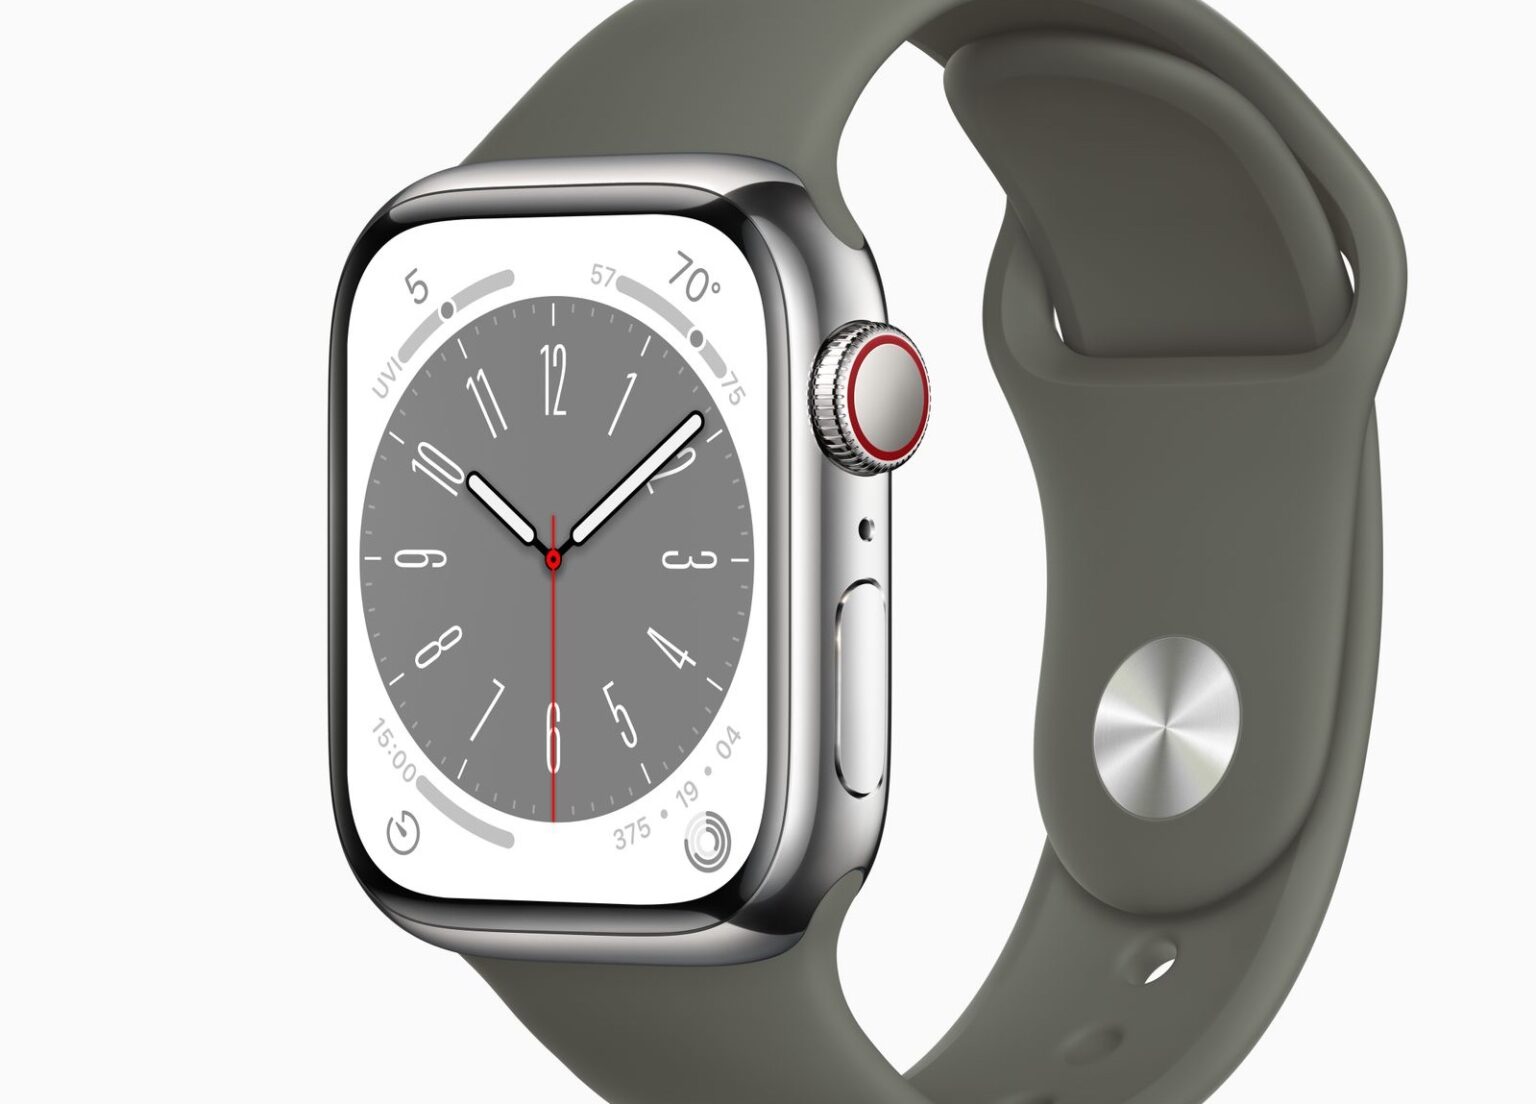 Stainless steel Apple Watches are the test case for a new manufacturing process using 3D printers.